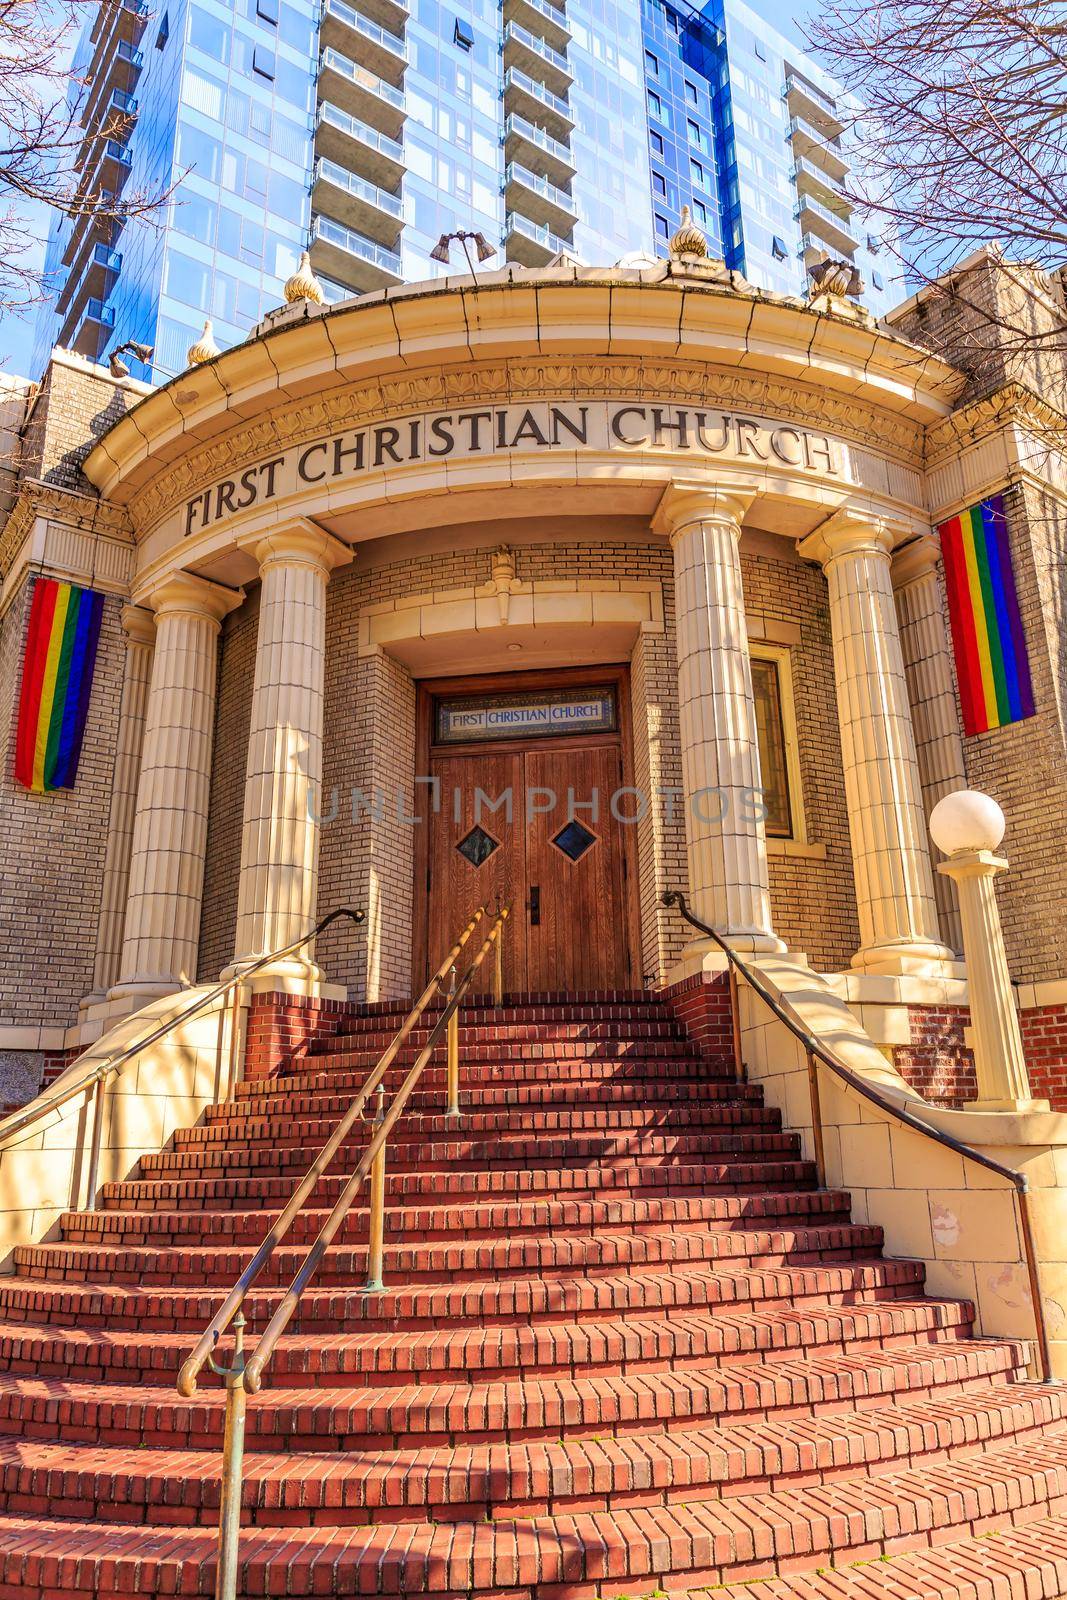 Portland, Oregon, USA - February 25, 2016: Established in 1879, First Christian Church of Portland shows its corner staircases leading to a column adorned entrance.